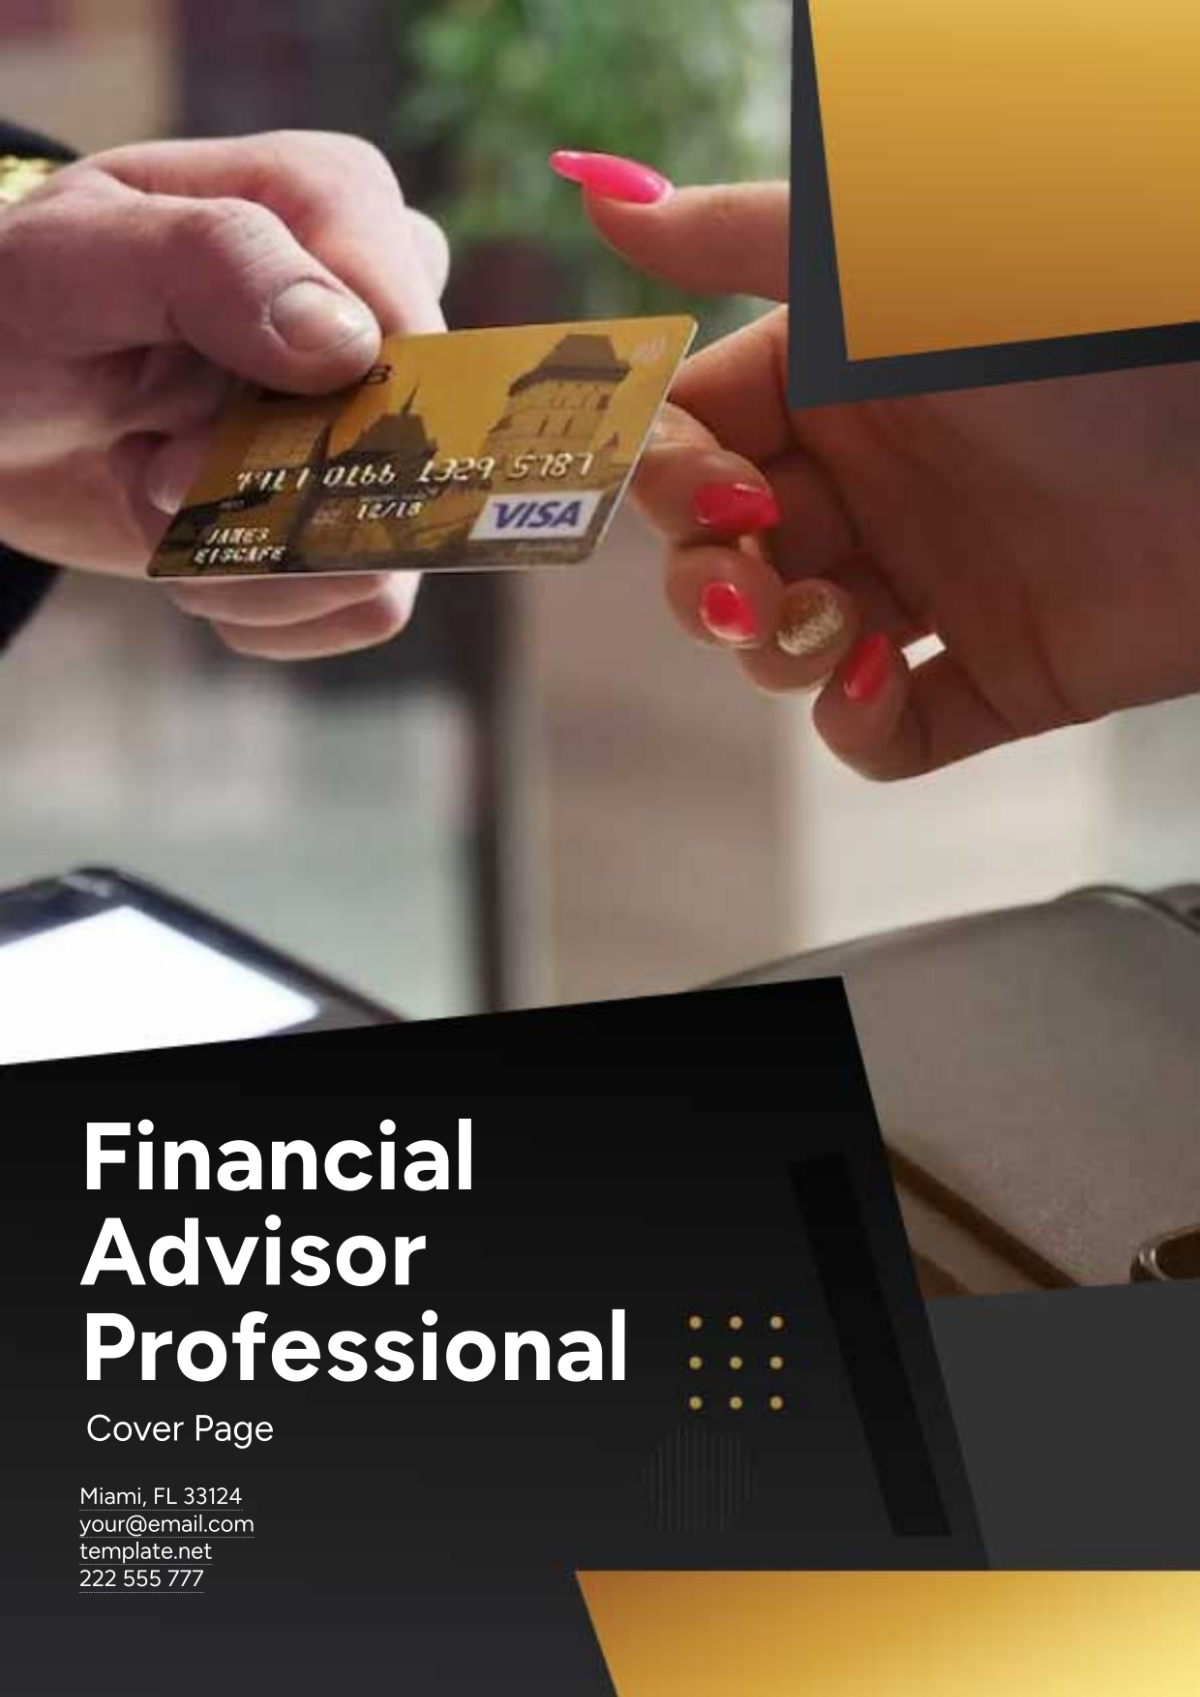 Financial Advisor Professional Cover Page